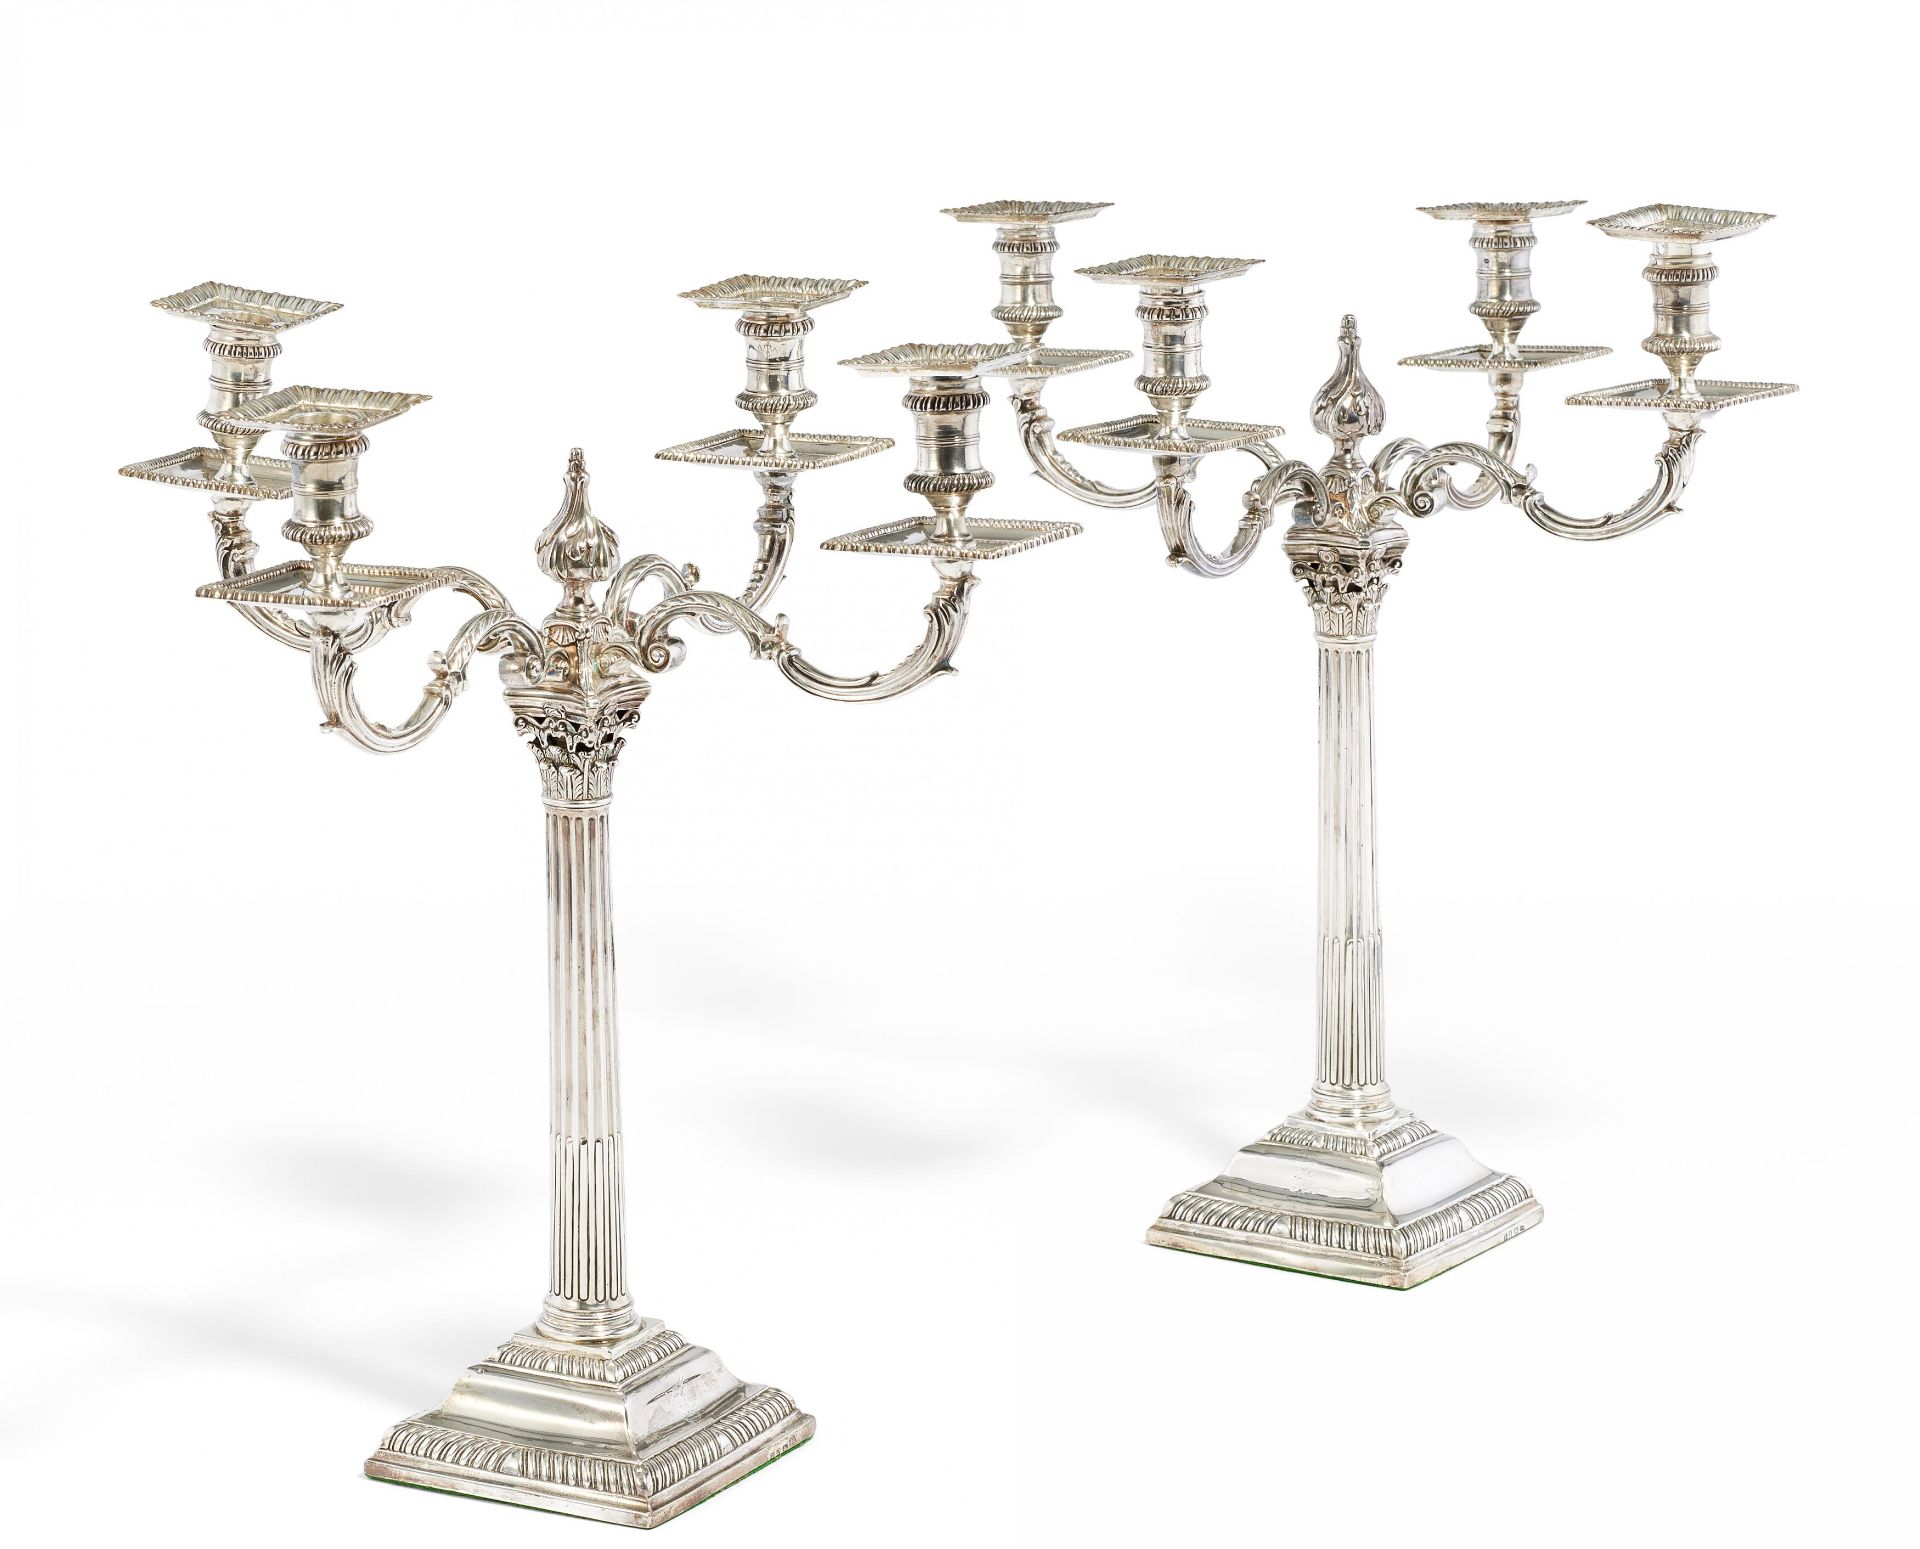 PAIR OF LARGE GEORGE III SILVER GIRANDOLES WITH COLUMN SHAFTS. London. 1765-66. William Cripps /